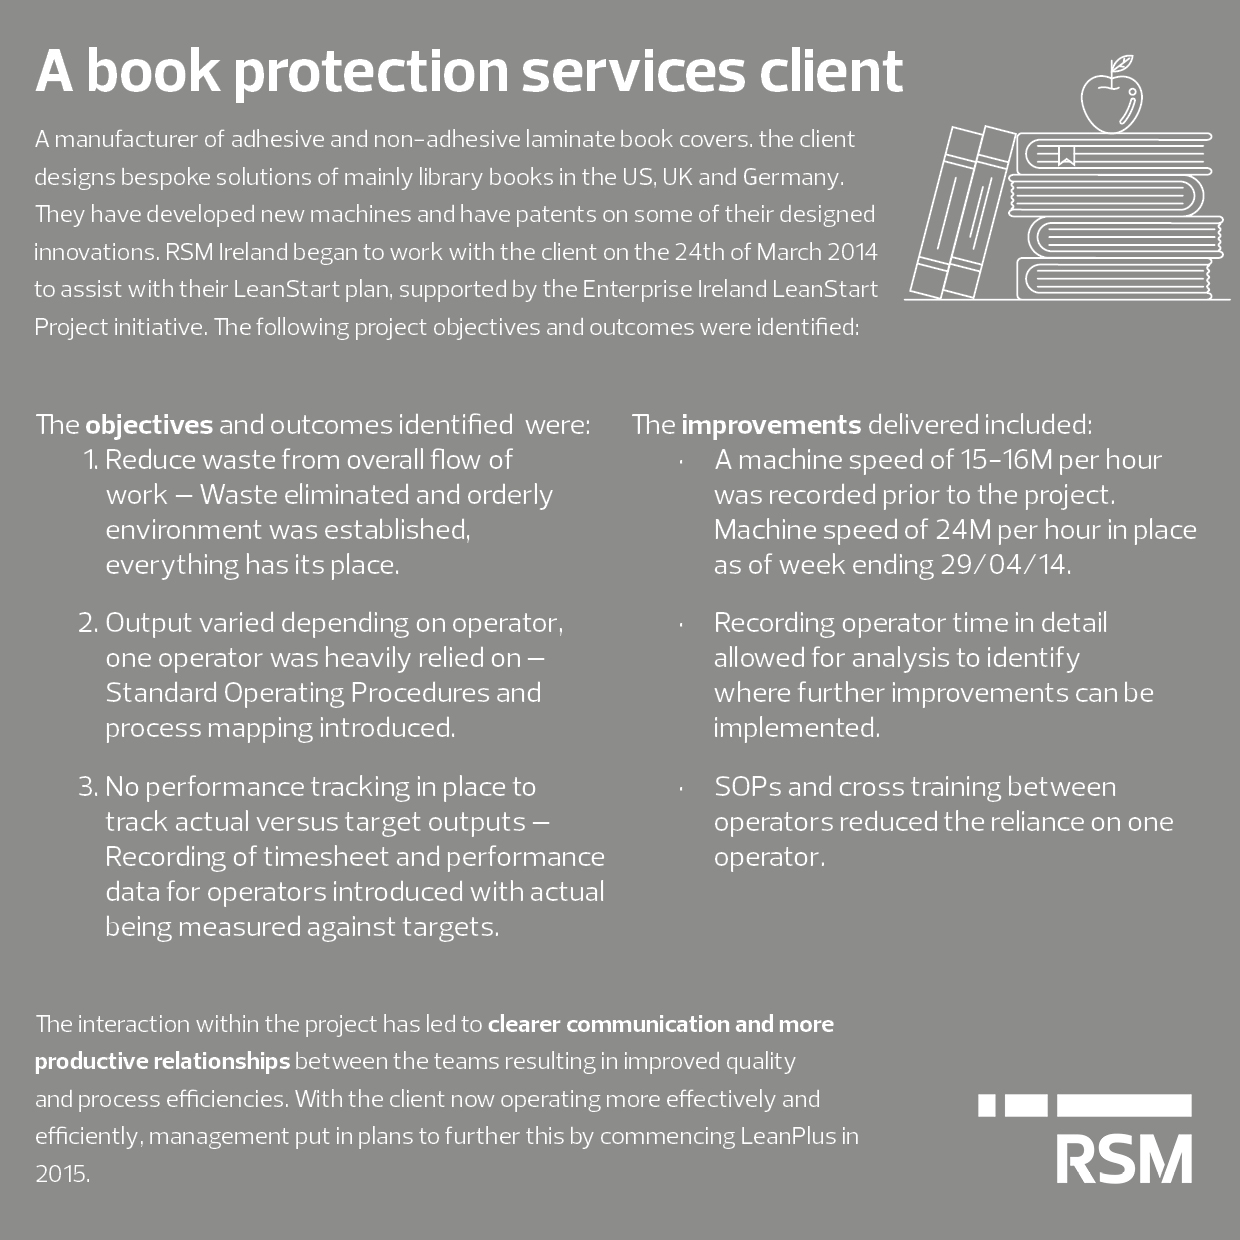 book_protection_services_client_case_study.jpg